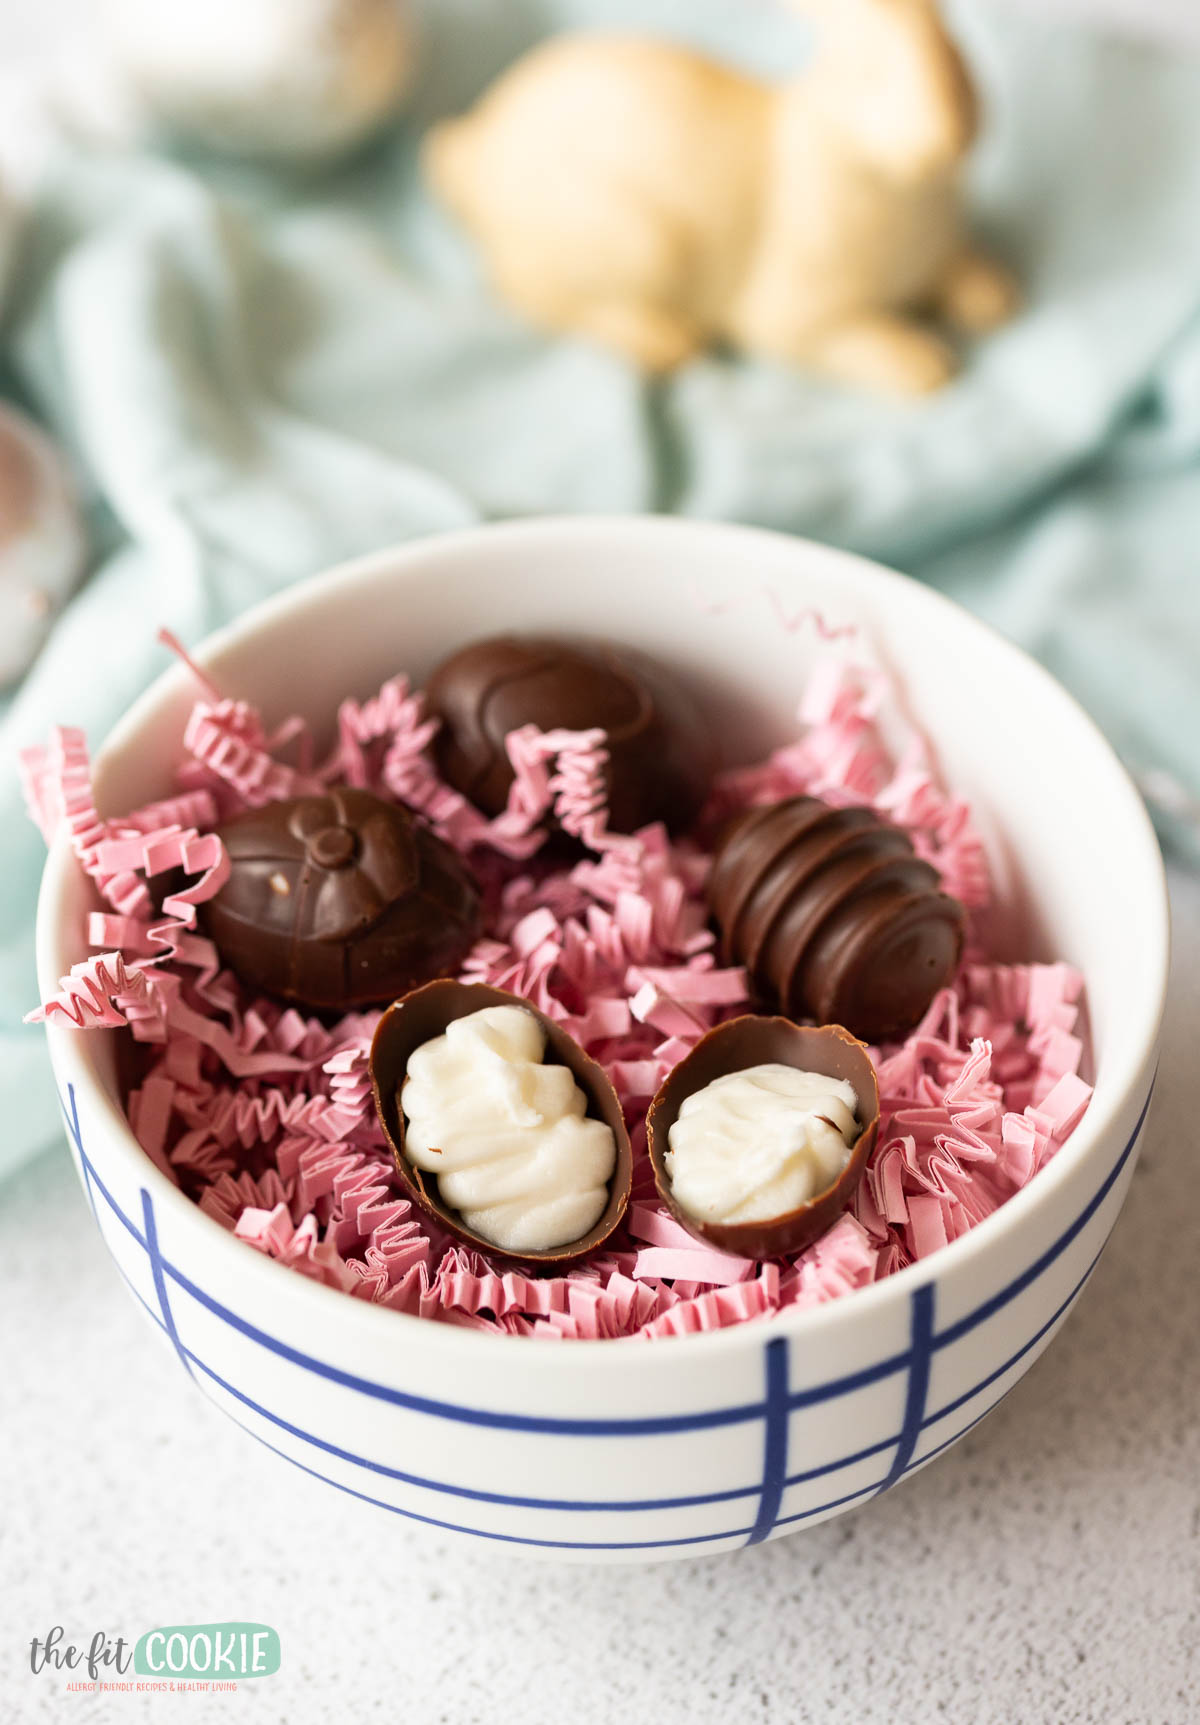 A bowl of chocolate cream eggs and confections with some pieces decoratively cut to show filling, presented on a bed of pink crinkle paper.